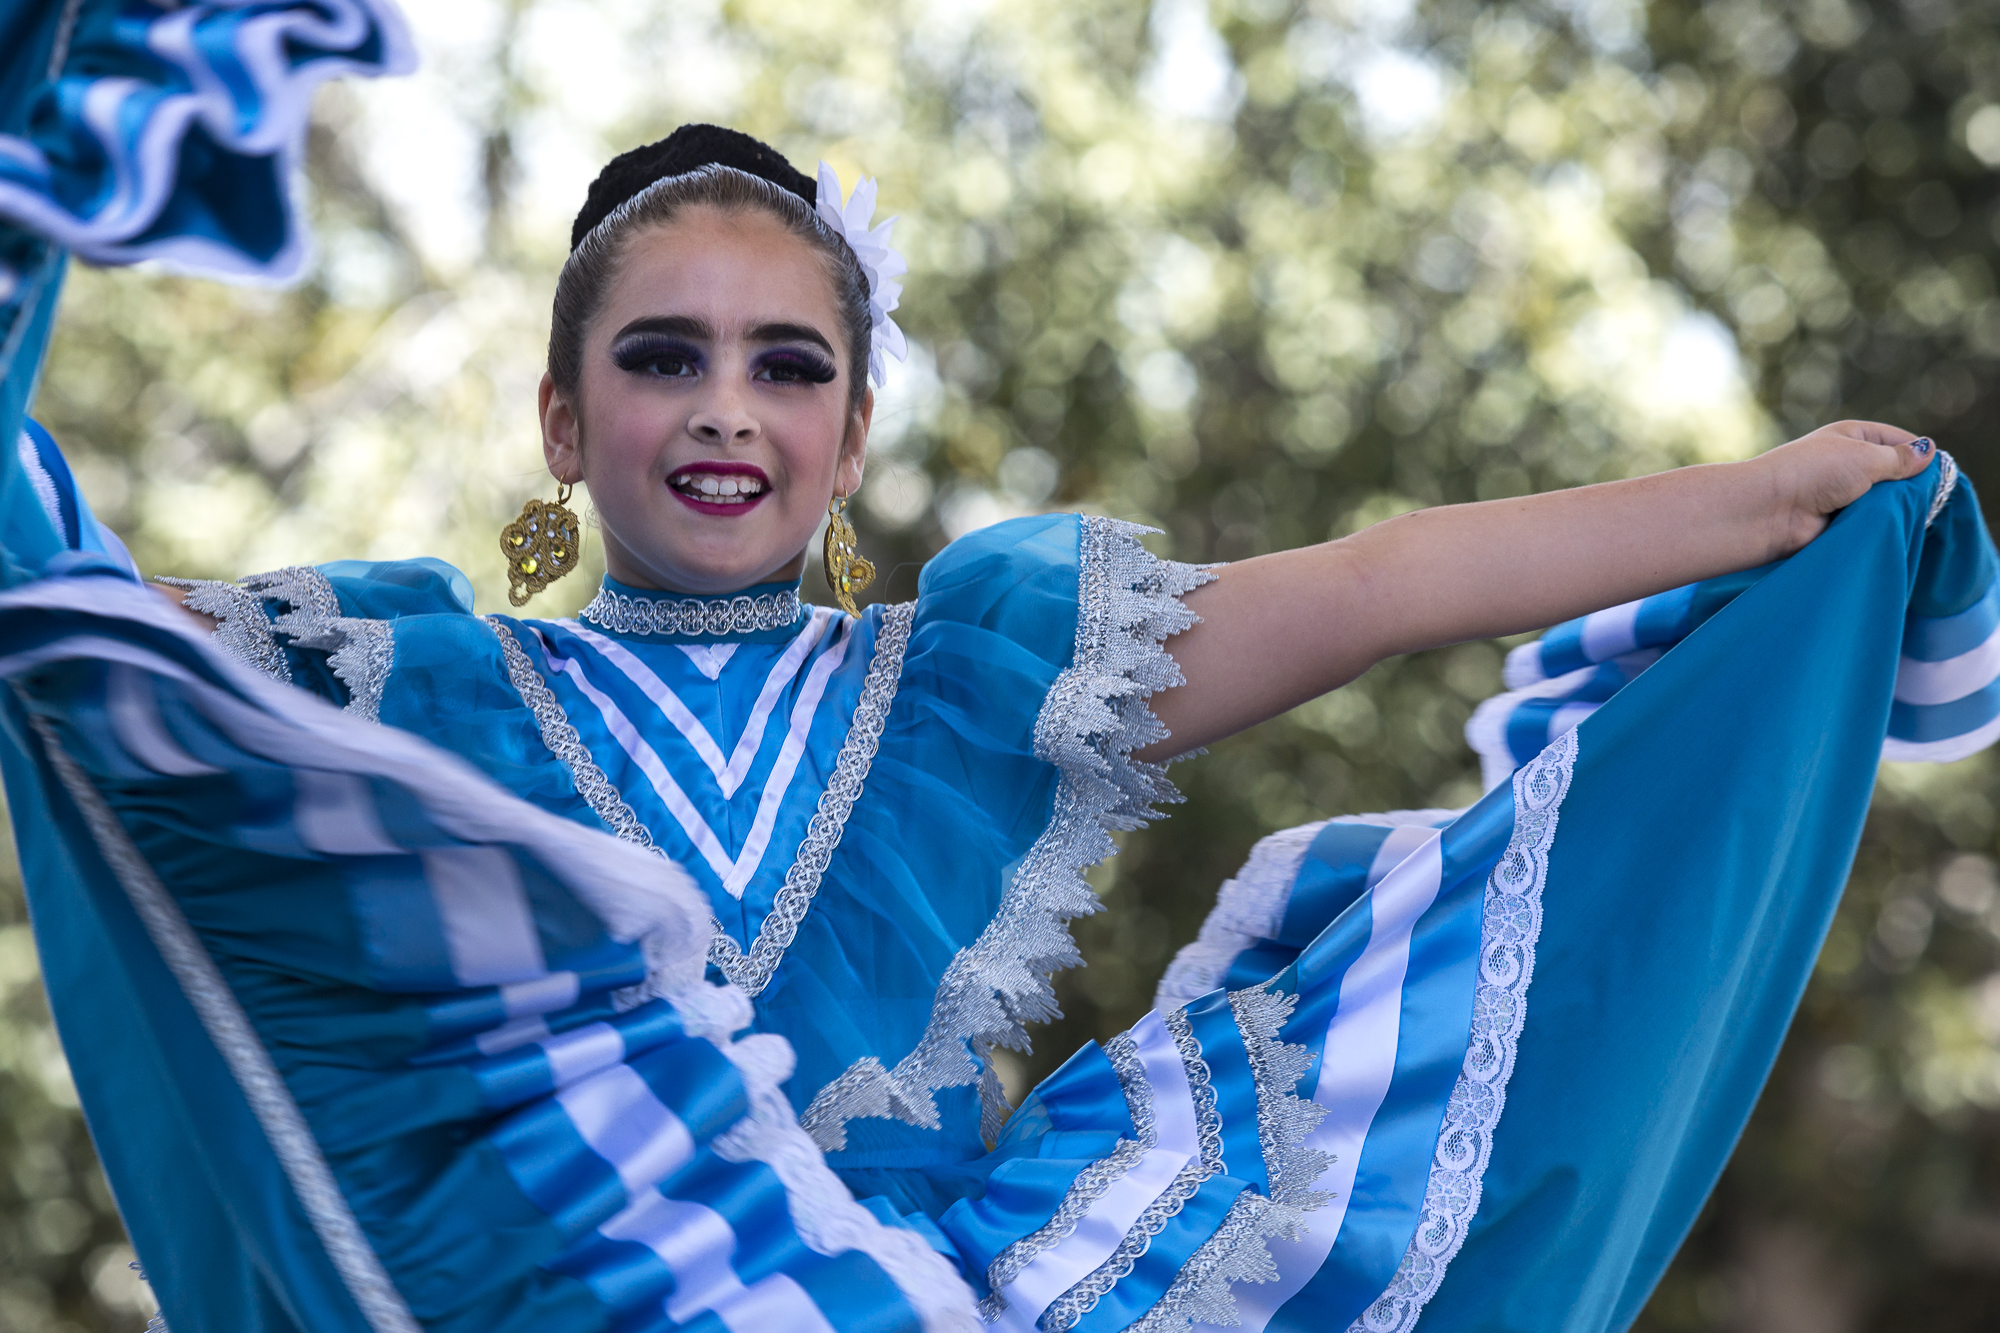  Children perform a traditional Folklora dance at Olvera Streets Cinco De Mayo celebration on May 5, 2018 in Downtown Los Angeles, California. (Matthew Martin/Corsair Photo) 